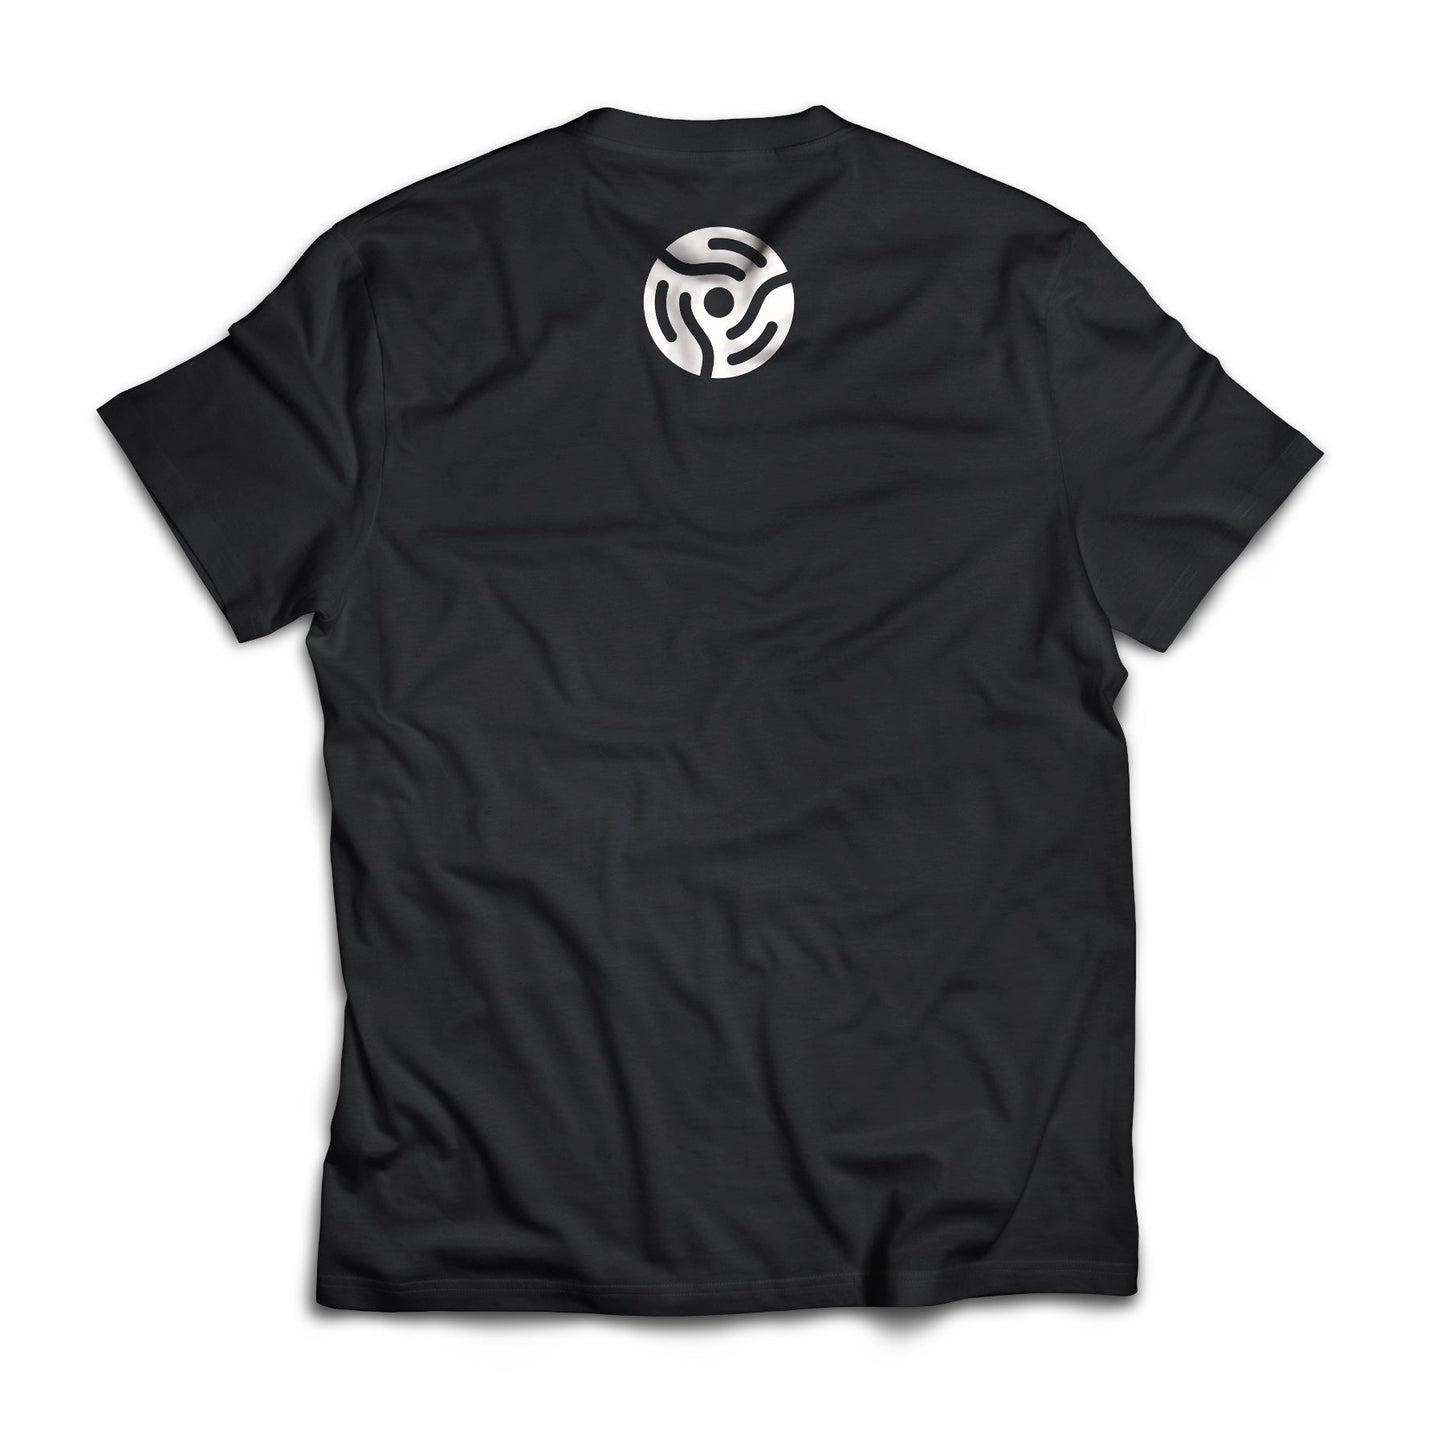 Back of Orbit T-Shirt, black with our spindle adaptor logo in white at the top